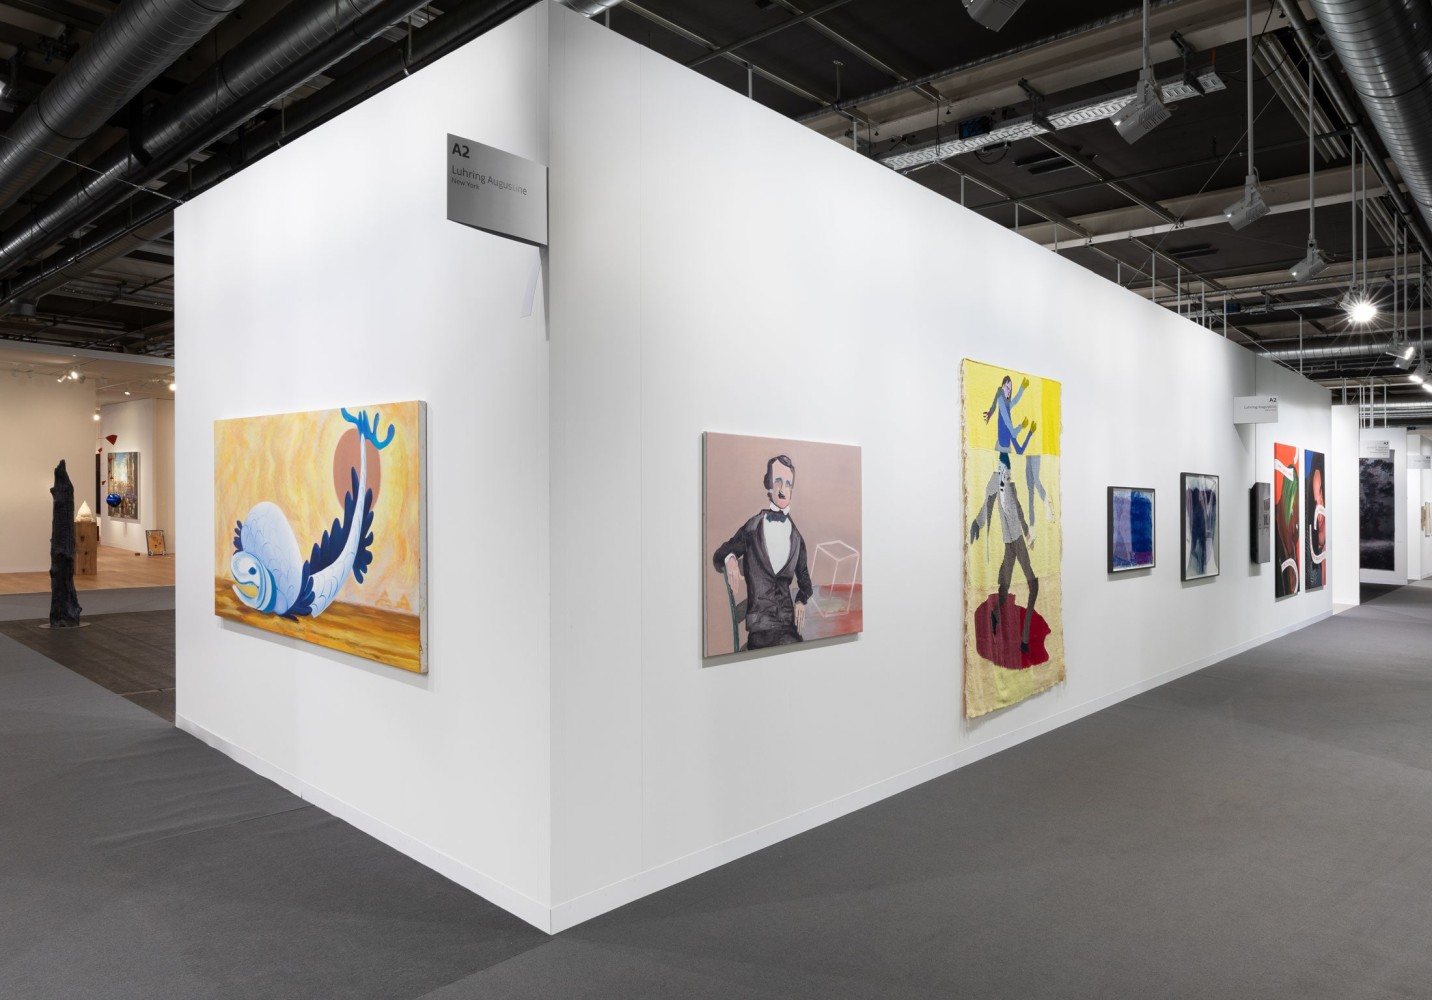 Luhring Augustine
Art Basel, Booth A2
Installation view
2021
Photo: Dawn Blackman